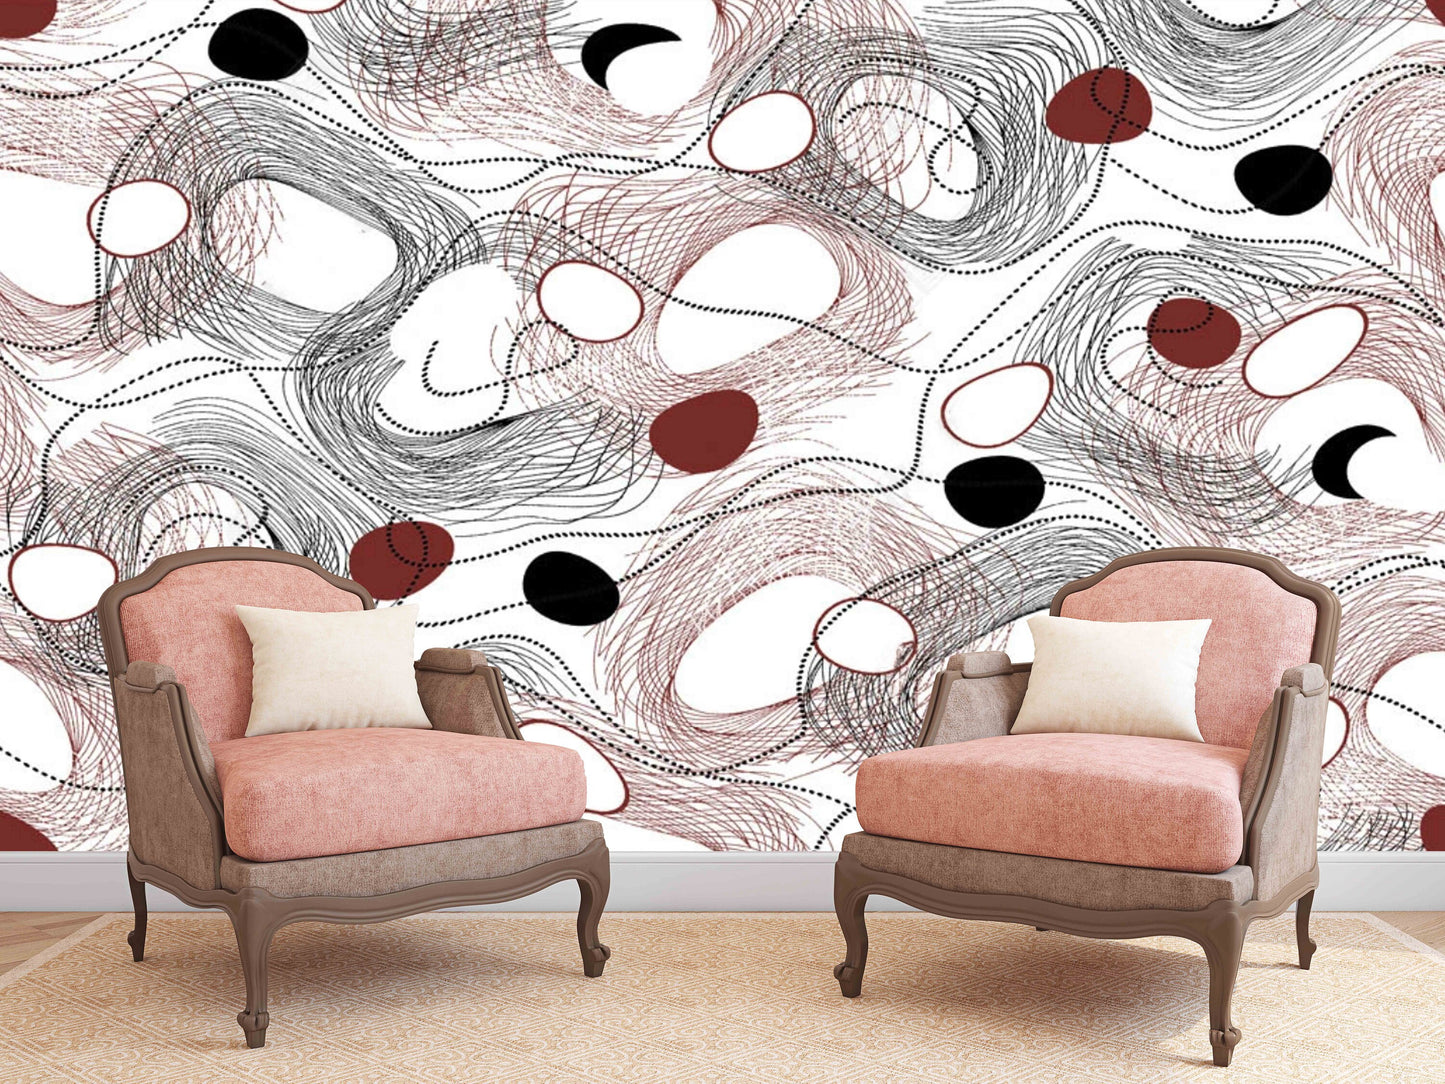 Abstract wallpaper peel and stick wall paper wall mural prints, photo removable wallpaper art deco, bedroom wall decor